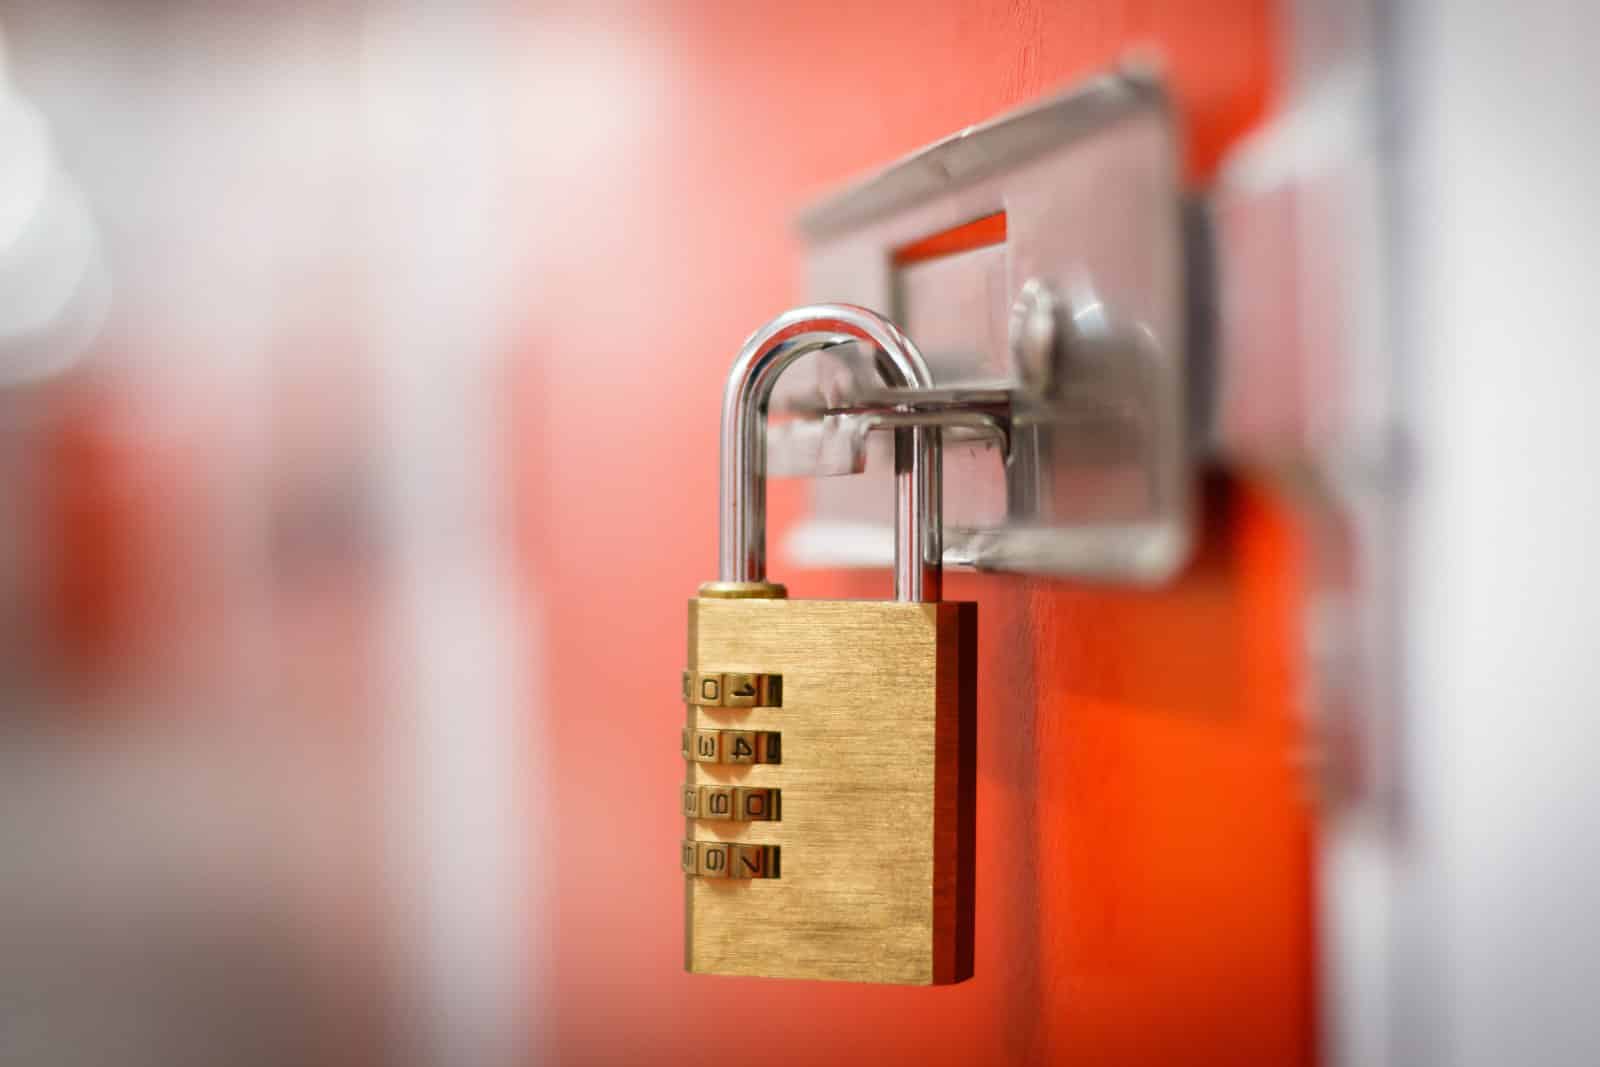 <p class="wp-caption-text">Image Credit: Shutterstock / Rebius</p>  <p><span>For that extra peace of mind in your accommodation, a portable door lock is a lightweight addition to your travel arsenal.</span></p>